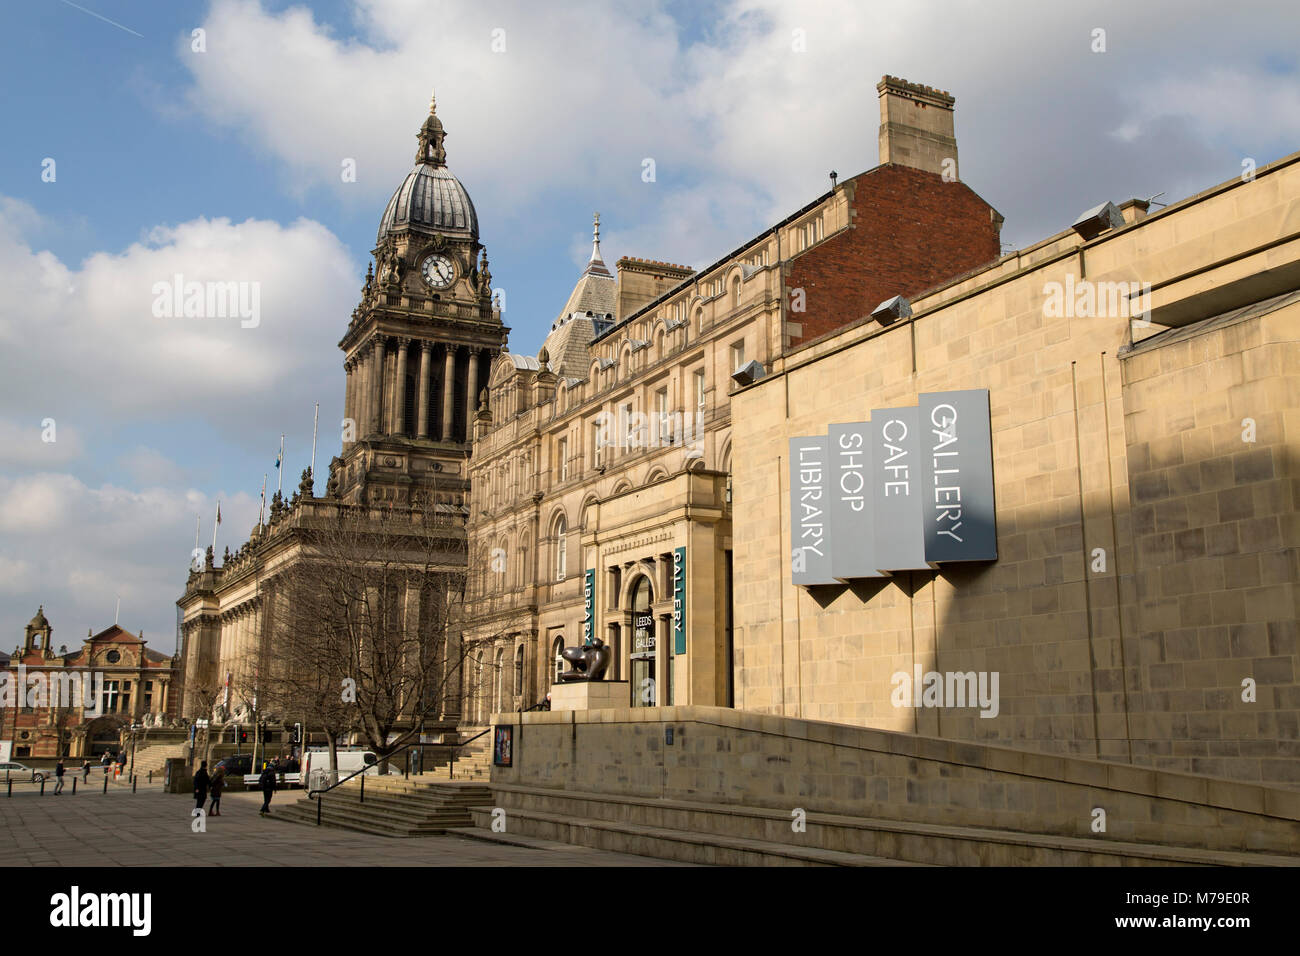 Leeds Art Gallery and Library in Leeds, UK. The building stands on the Headrow. Stock Photo